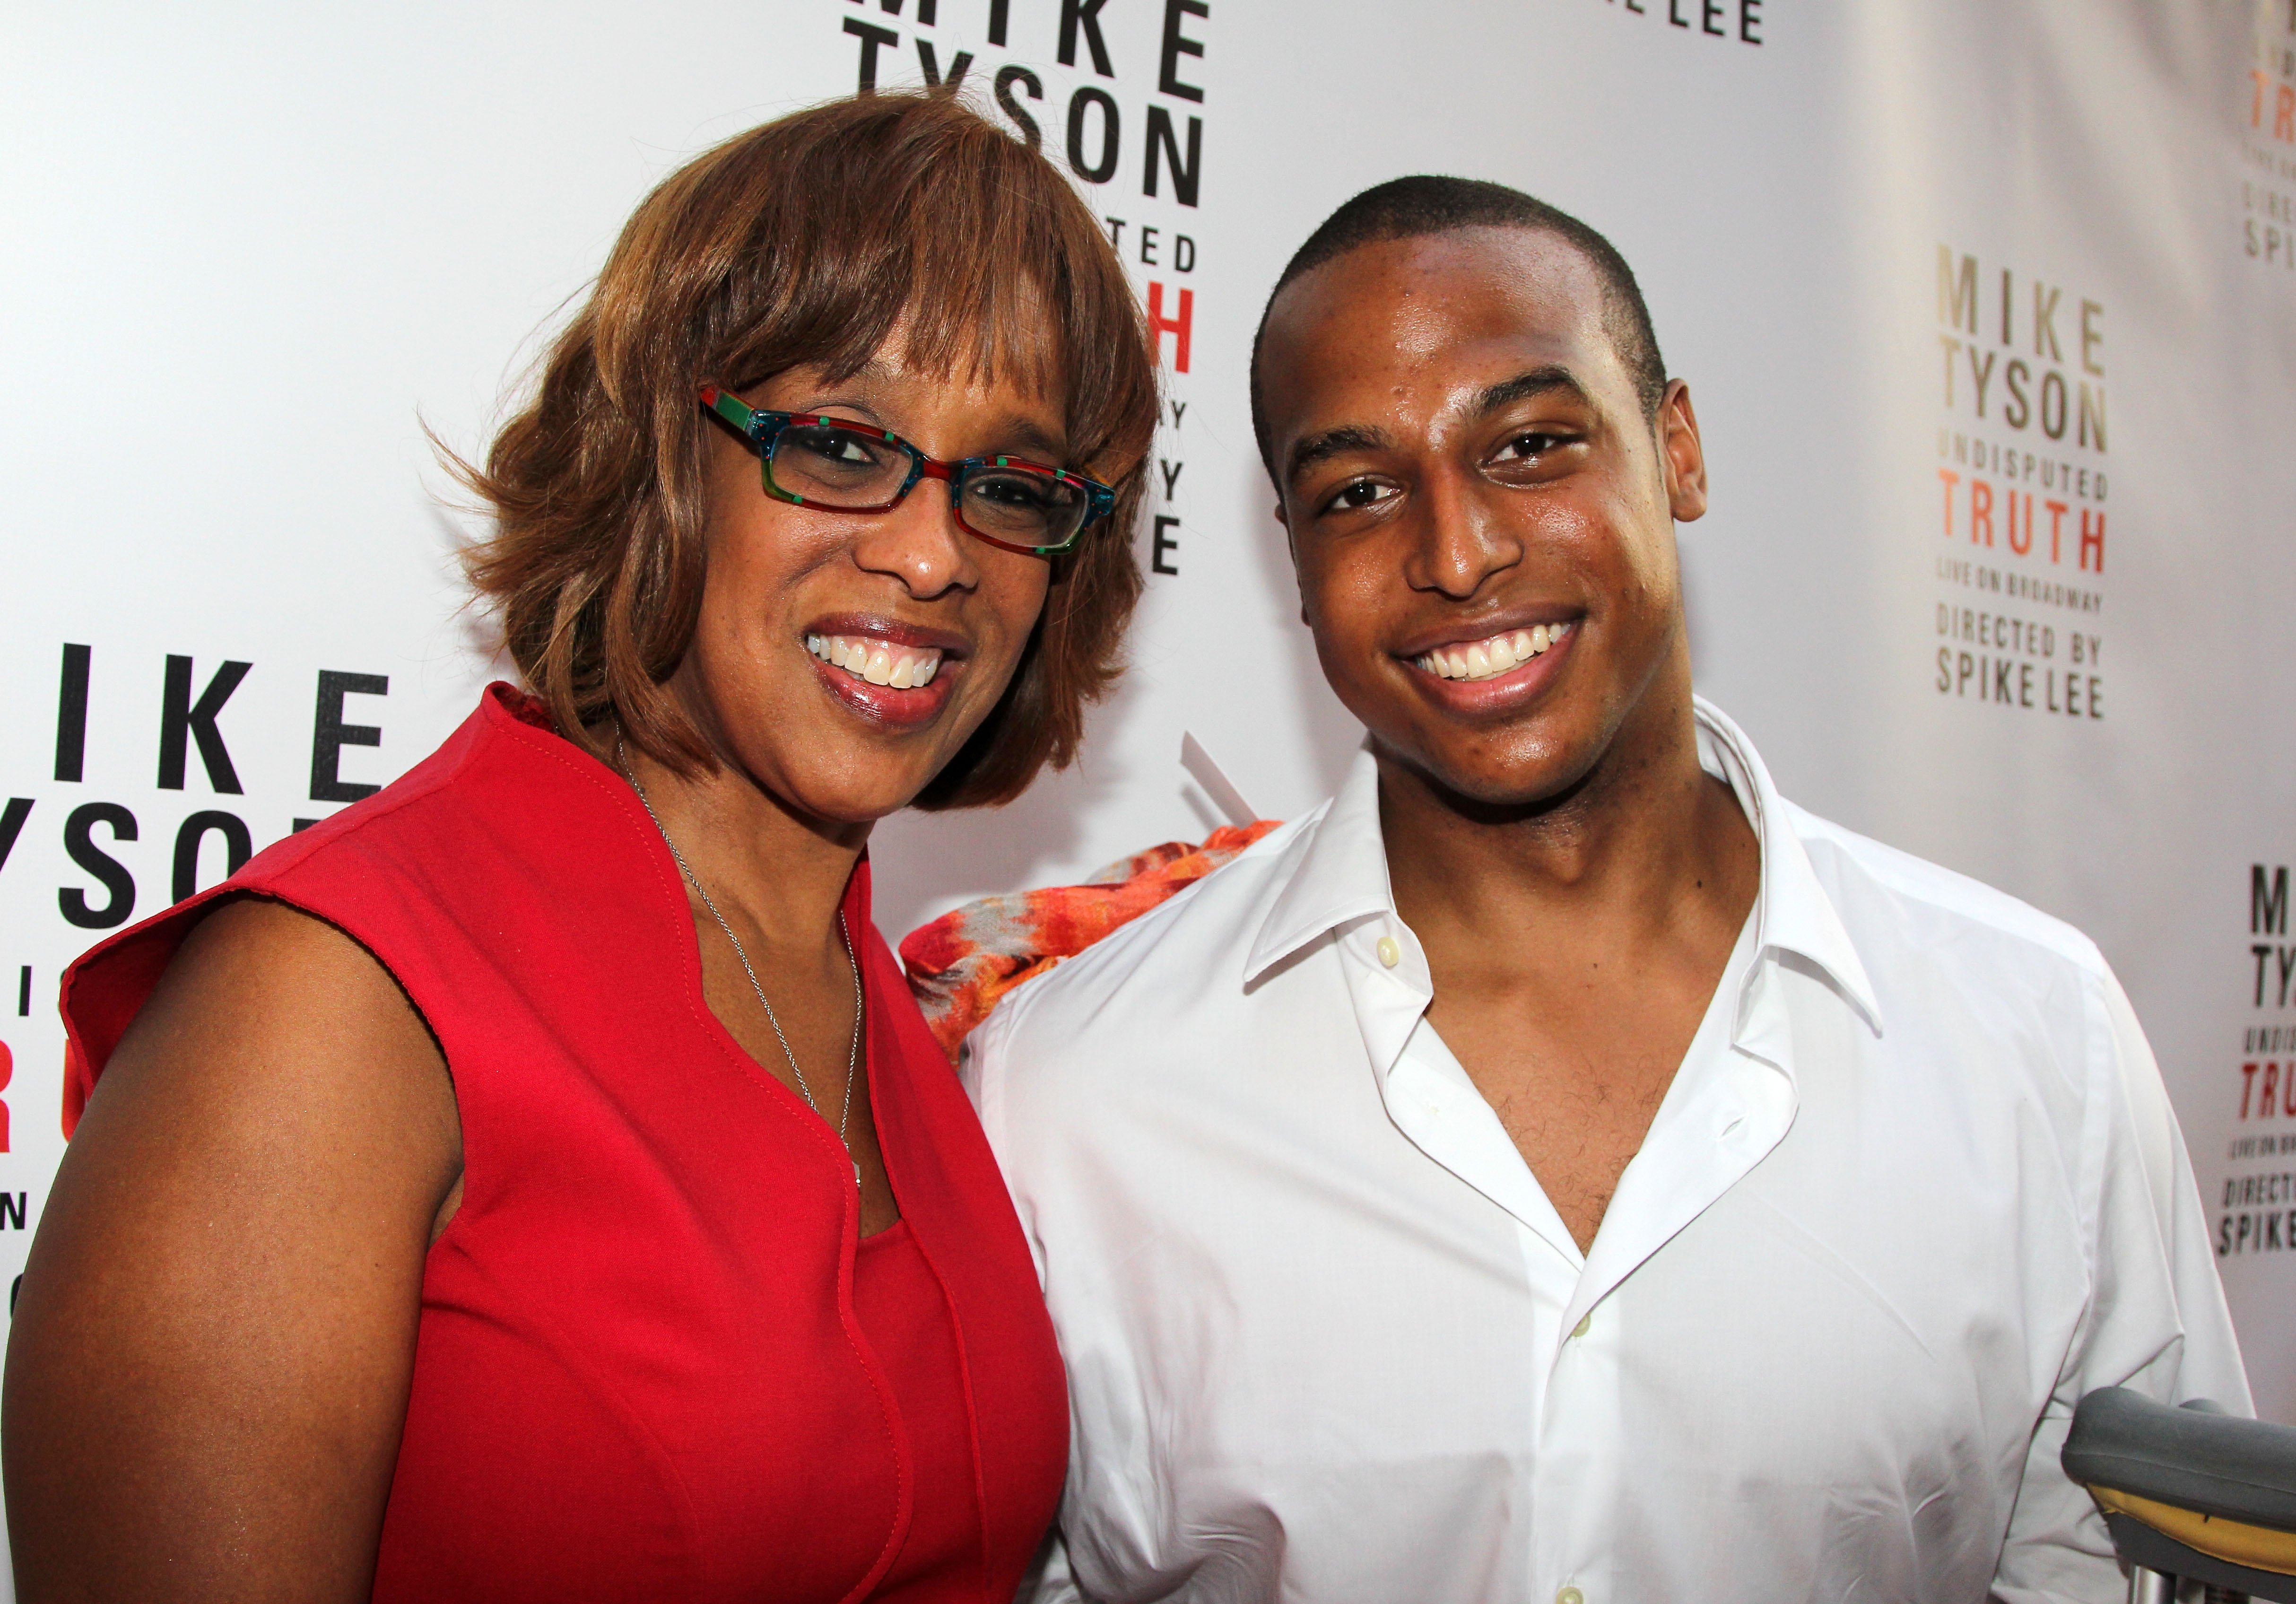  Gayle King and her son Will Bumpus attend the Broadway opening night for "Mike Tyson: Undisputed Truth" at the Longacre Theatre on August 2, 2012 in New York City | Photo: GettyImages